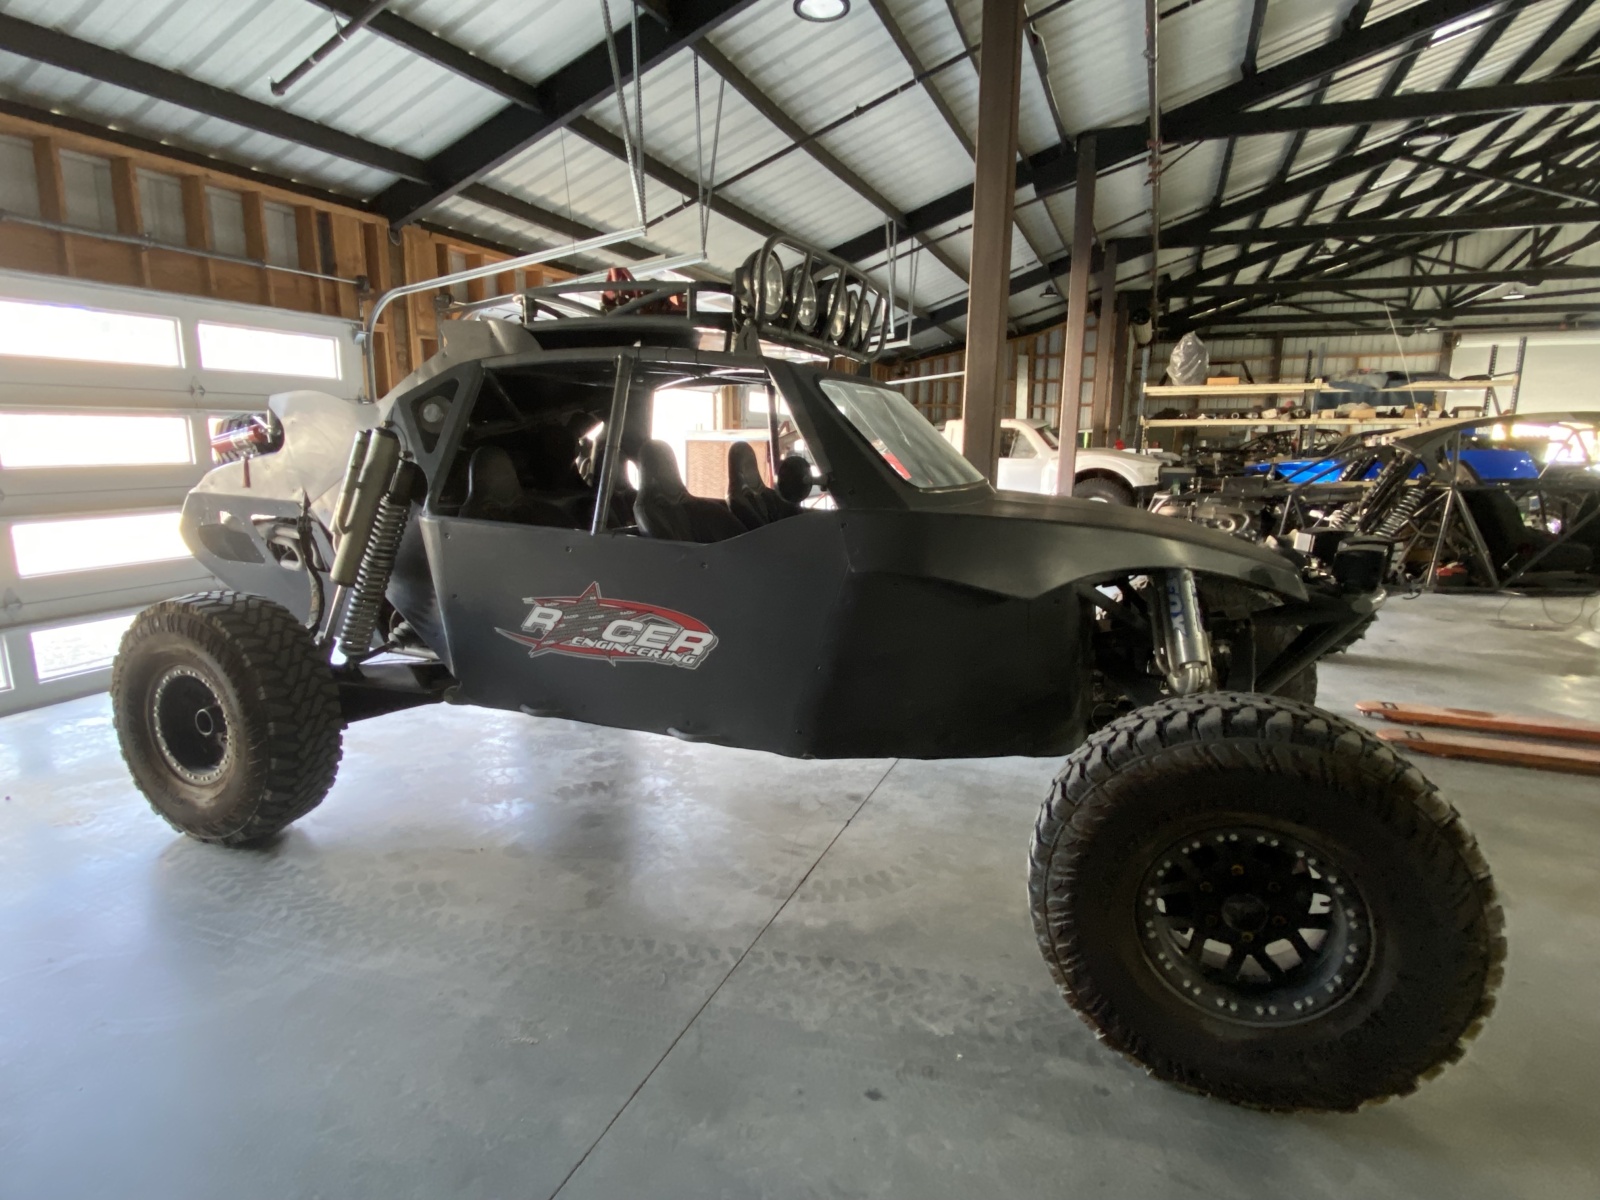 For Sale: Racer Engineering Prerunner (4 seat), Class 1 car - photo6